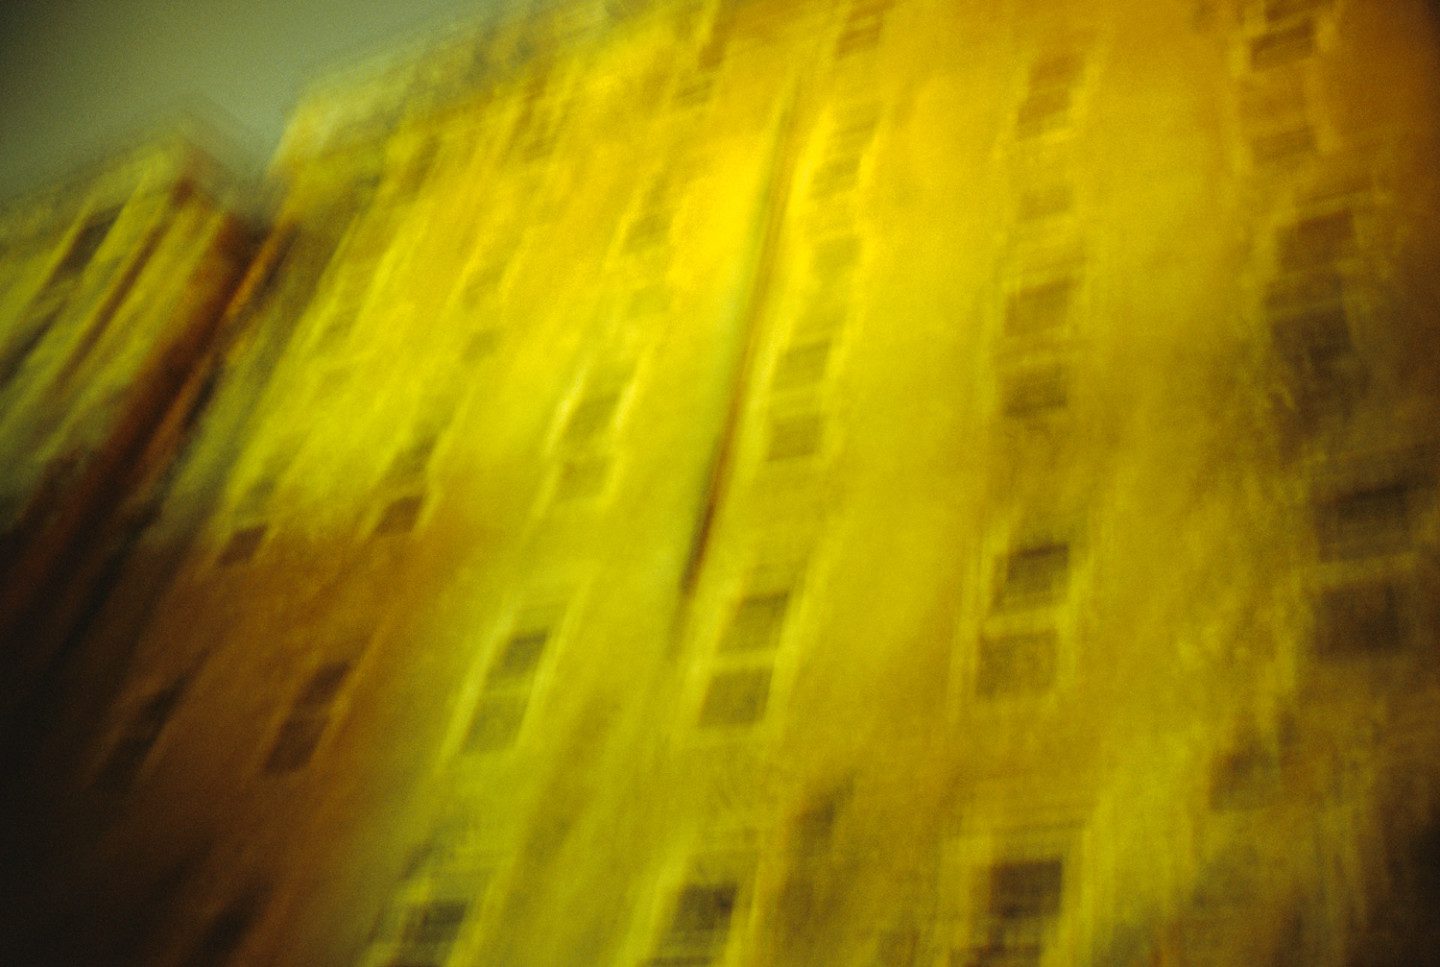 Photograph depicting a blurred house facade